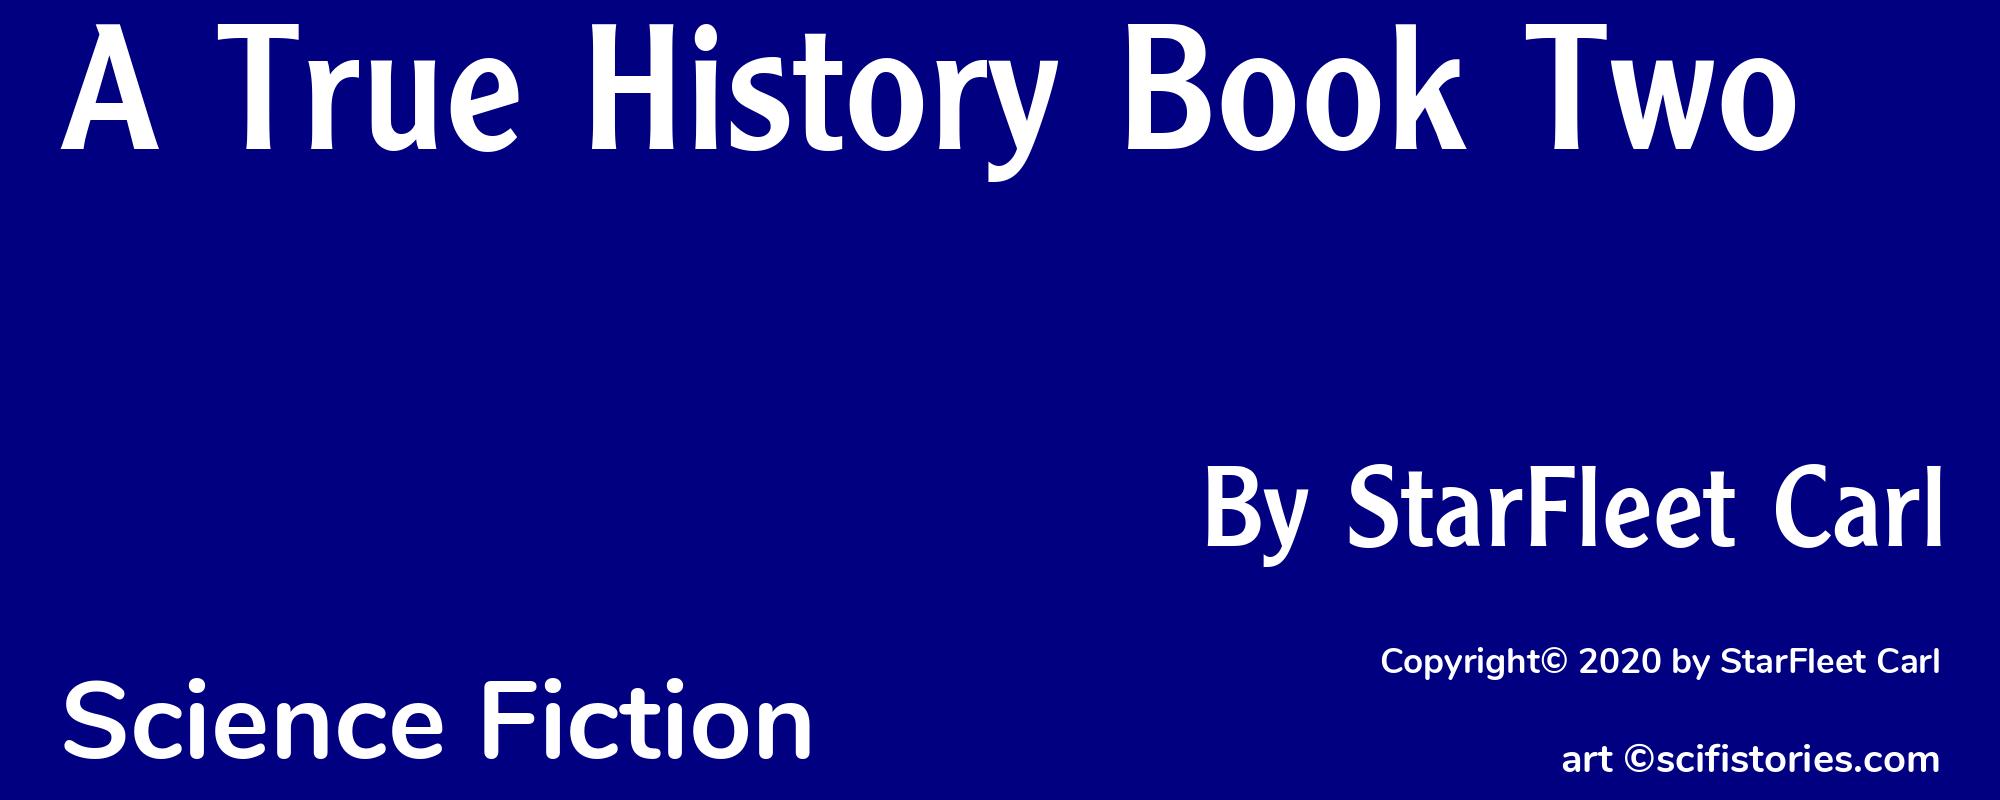 A True History Book Two - Cover